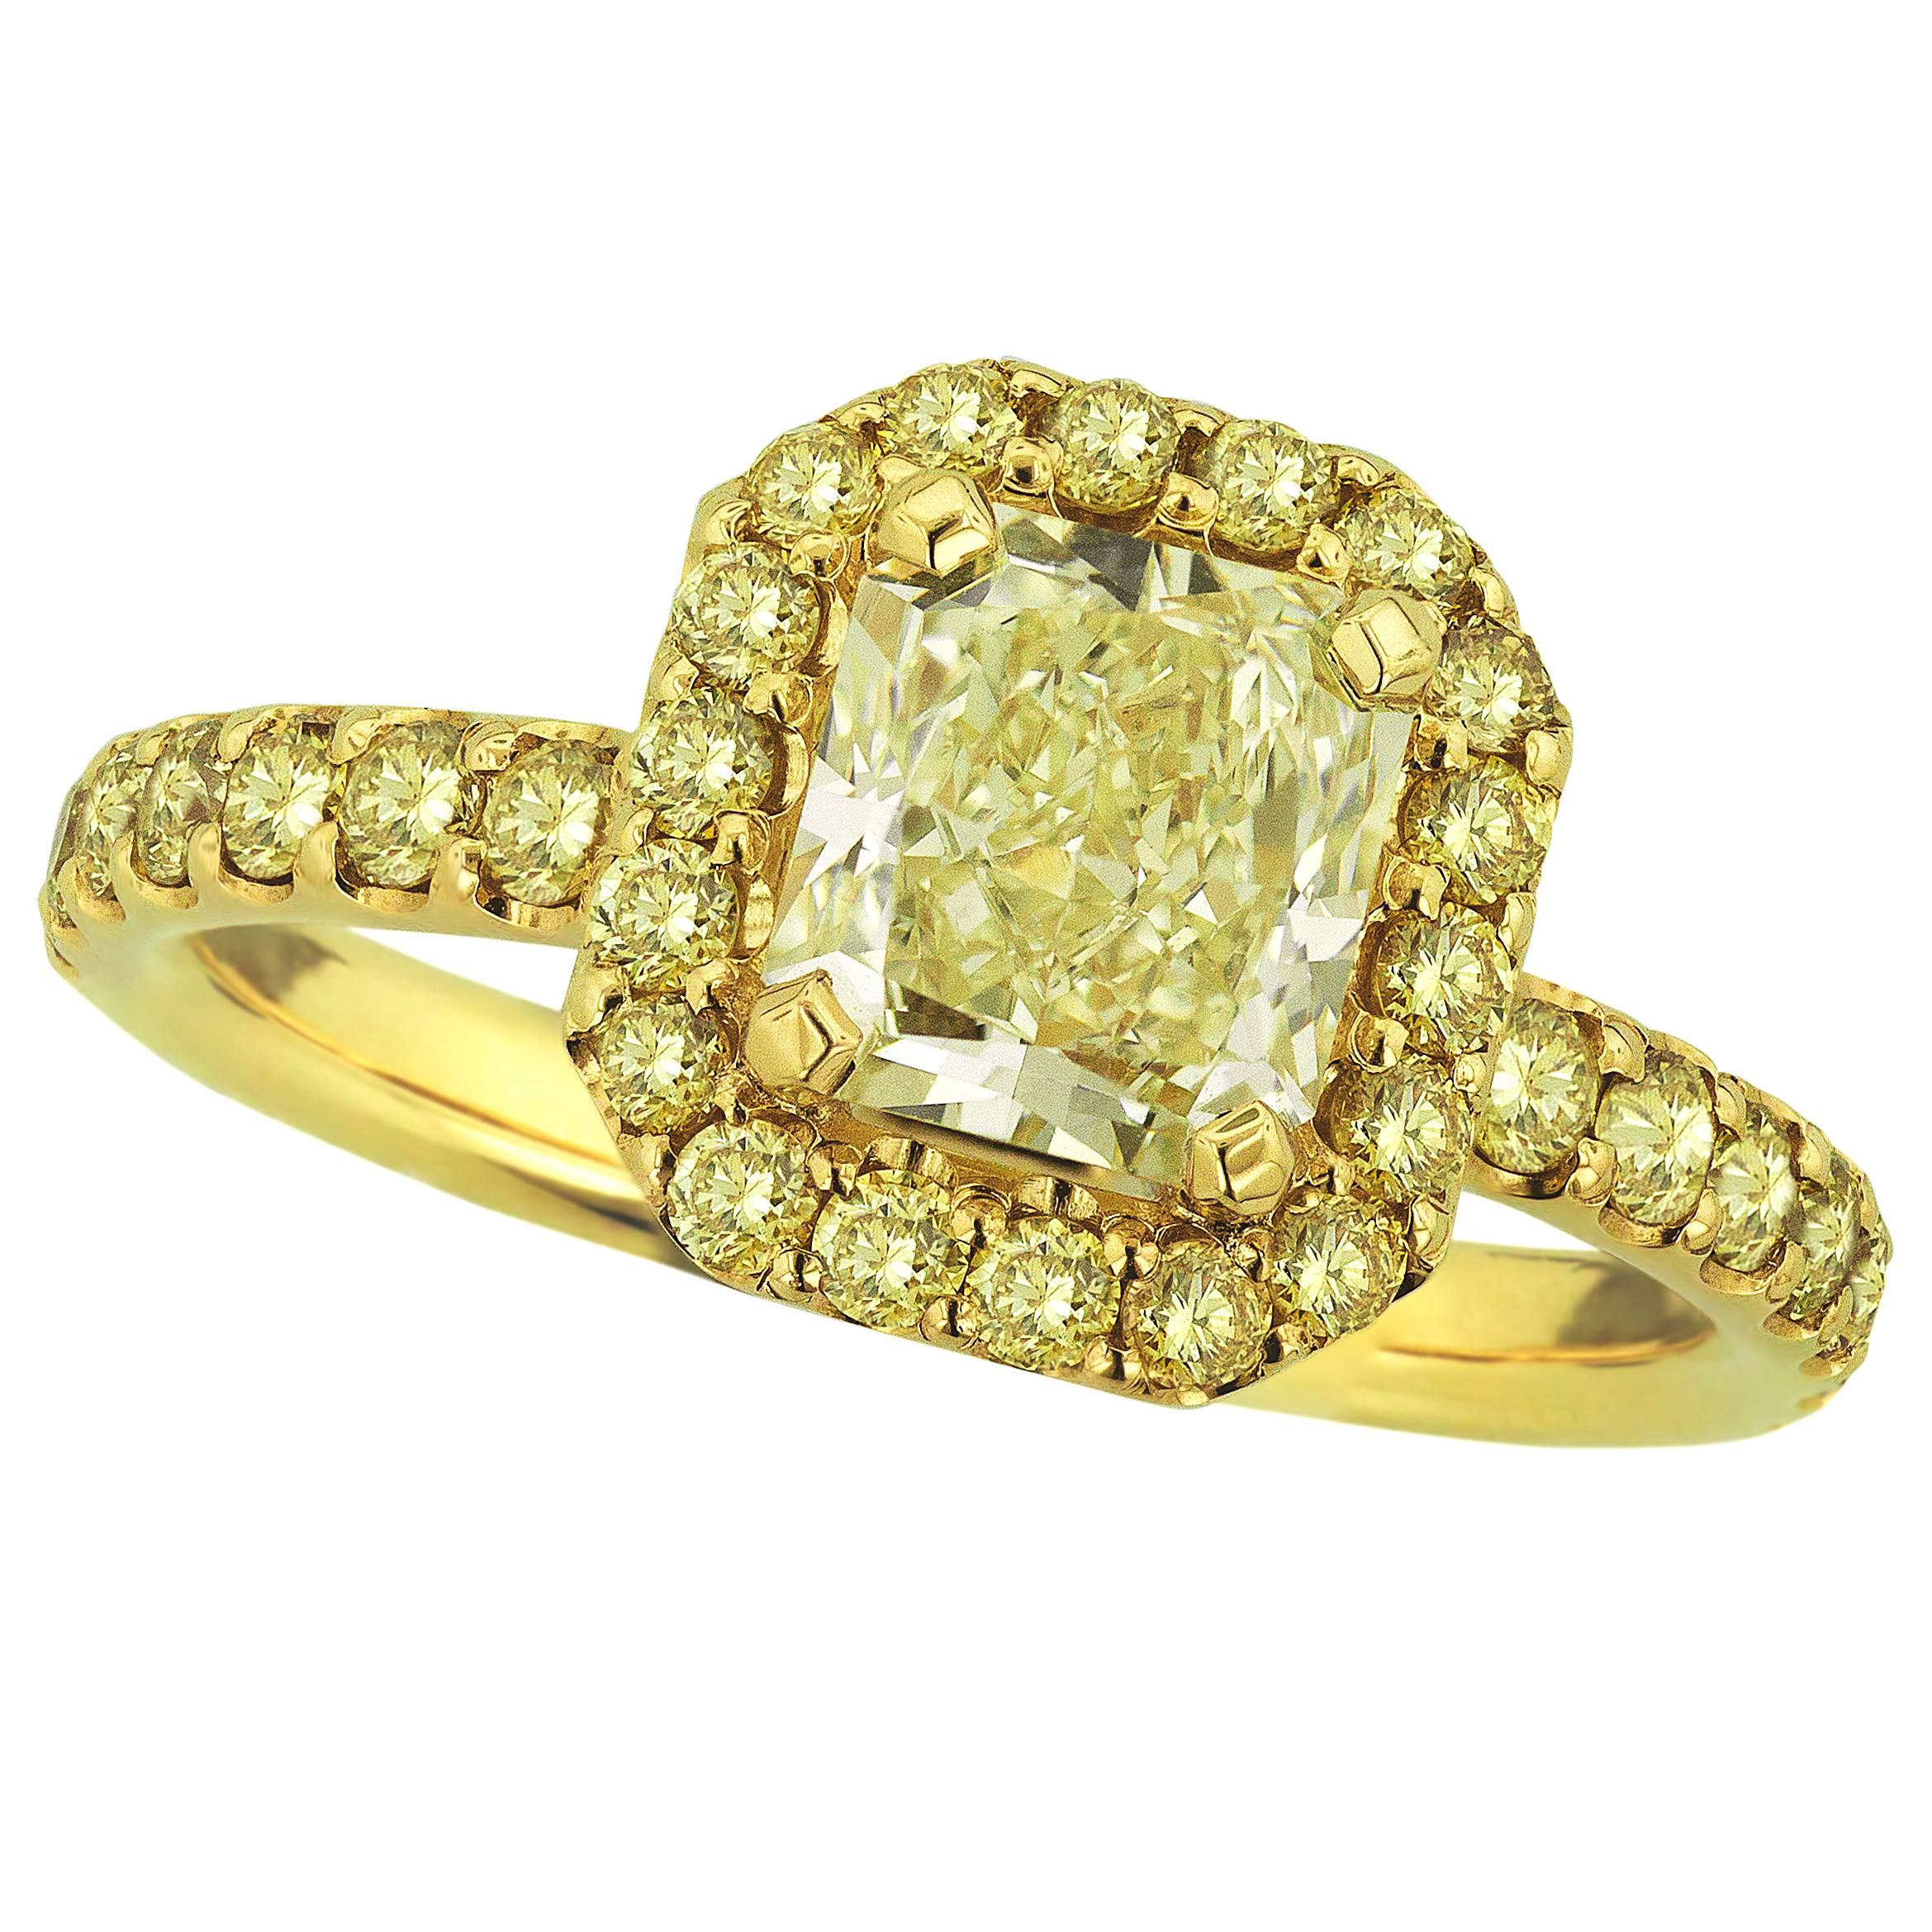 2.47 Carat Natural Diamond Yellow Gold Halo Engagement Ring For Sale